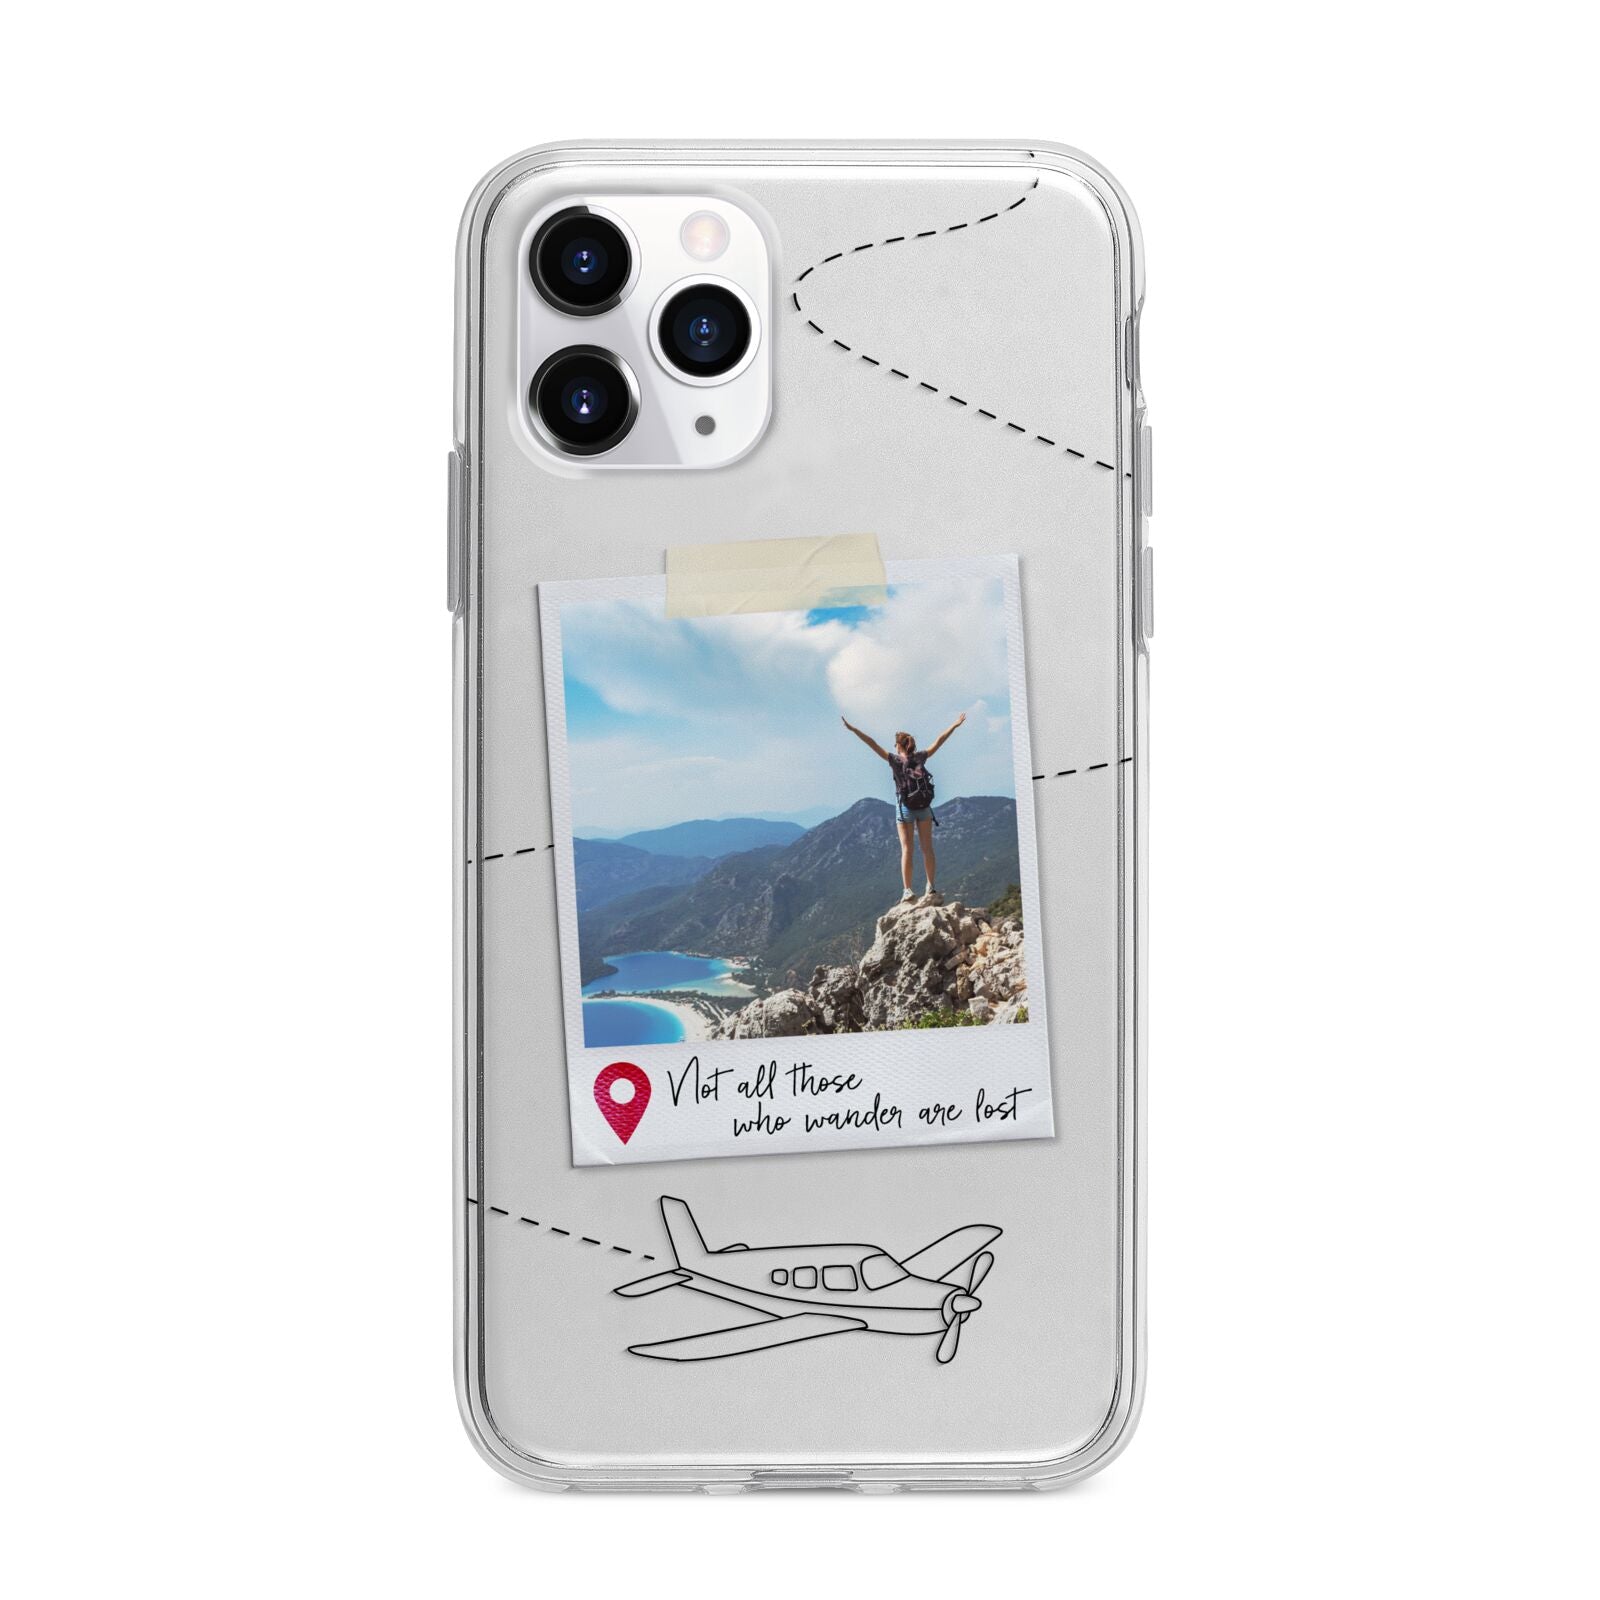 Backpacker Photo Upload Personalised Apple iPhone 11 Pro in Silver with Bumper Case